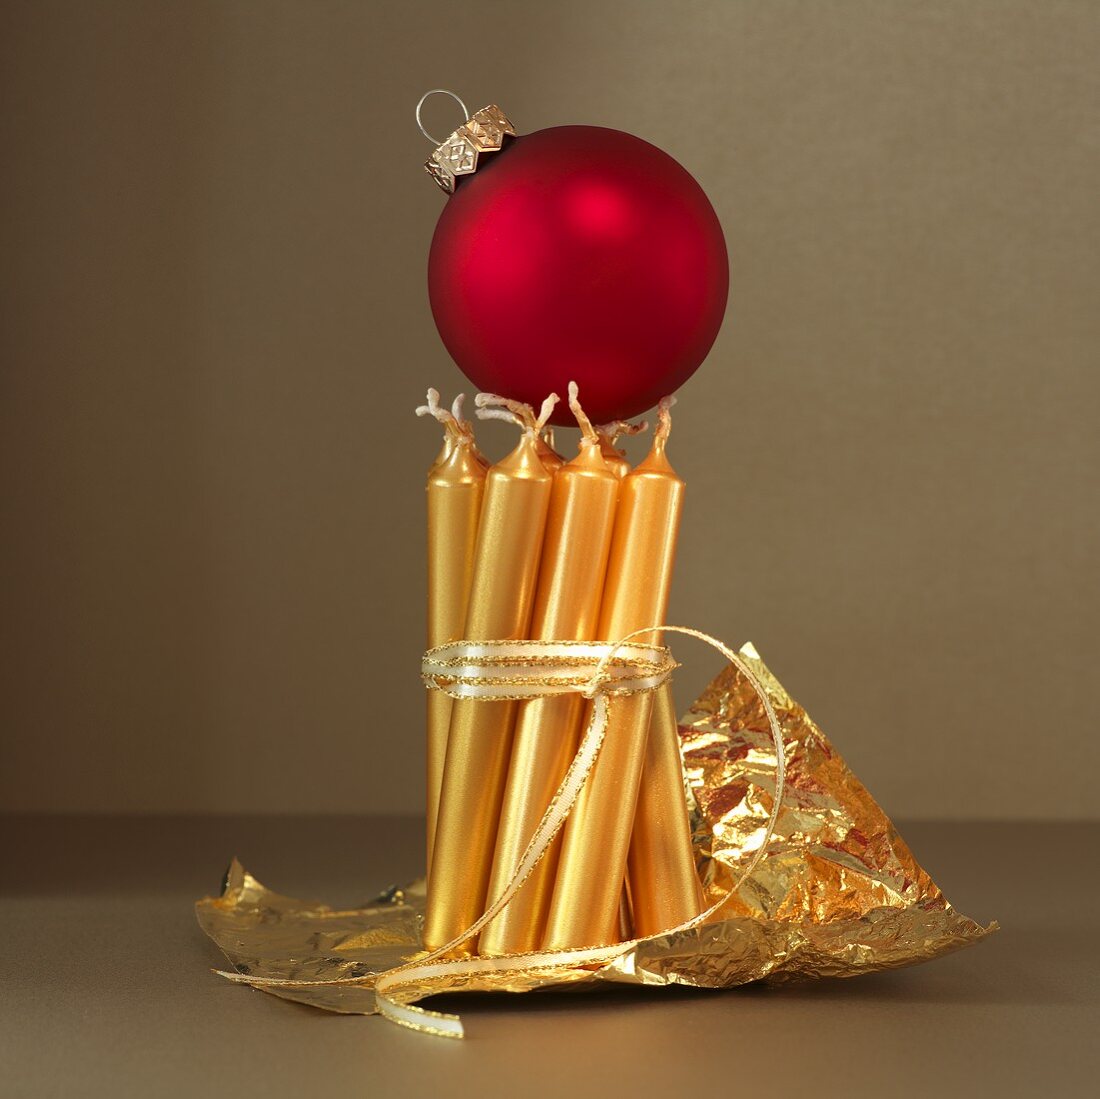 A red Christmas bauble balanced on golden candles